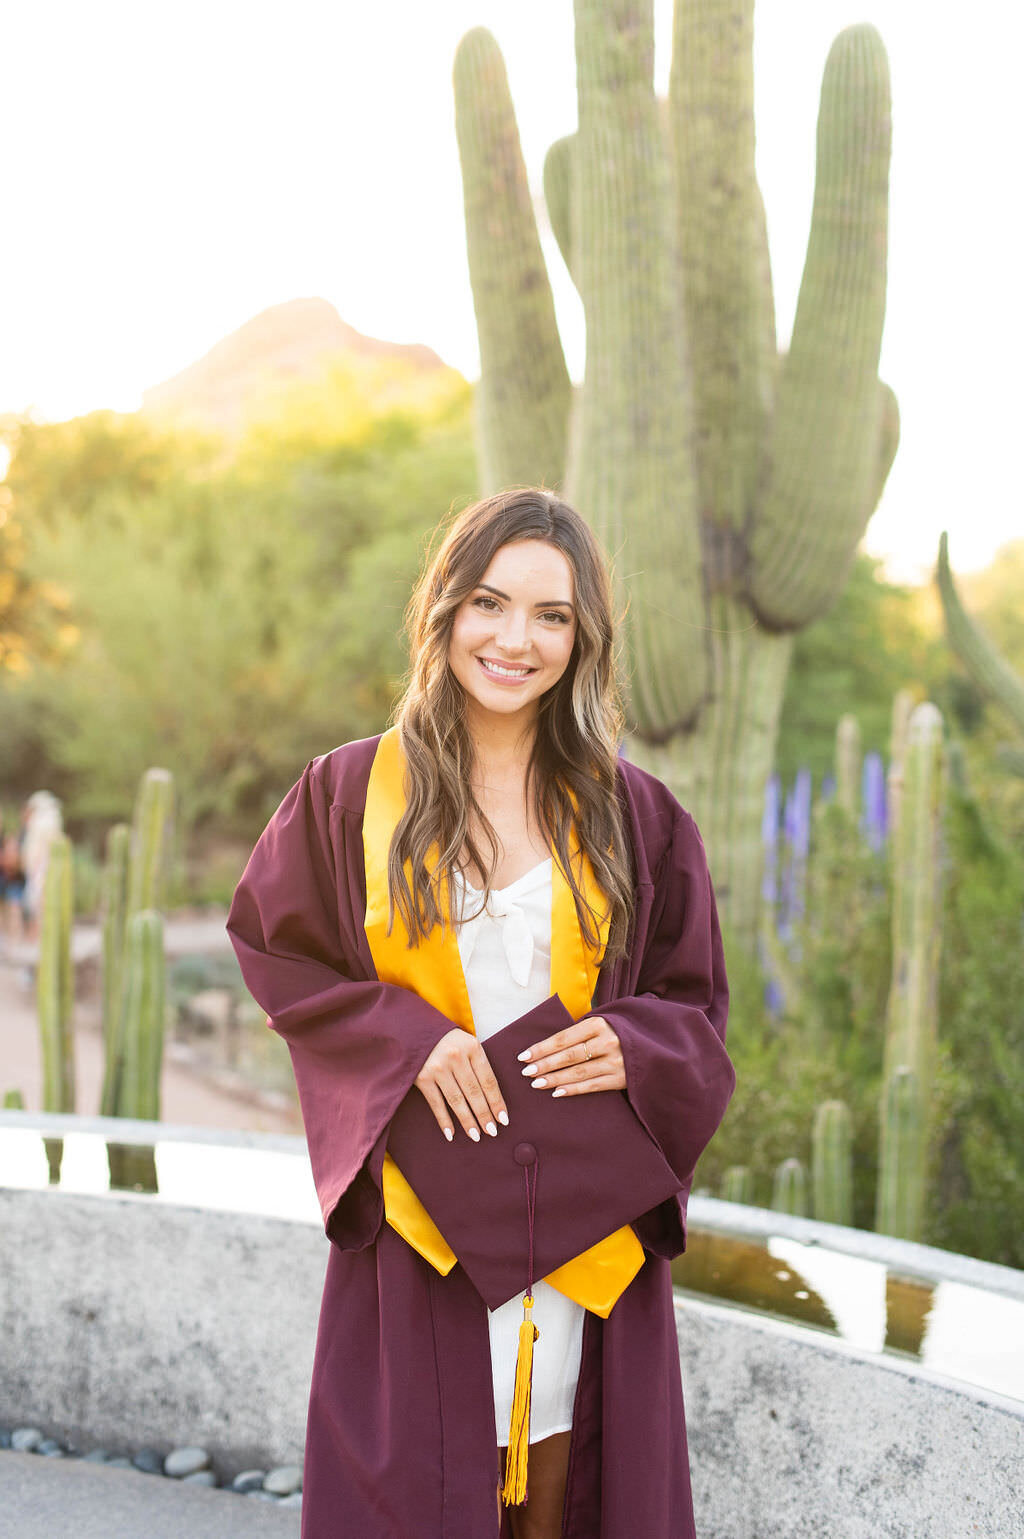 A woman smiling while holding her graduation cap in a small garden.